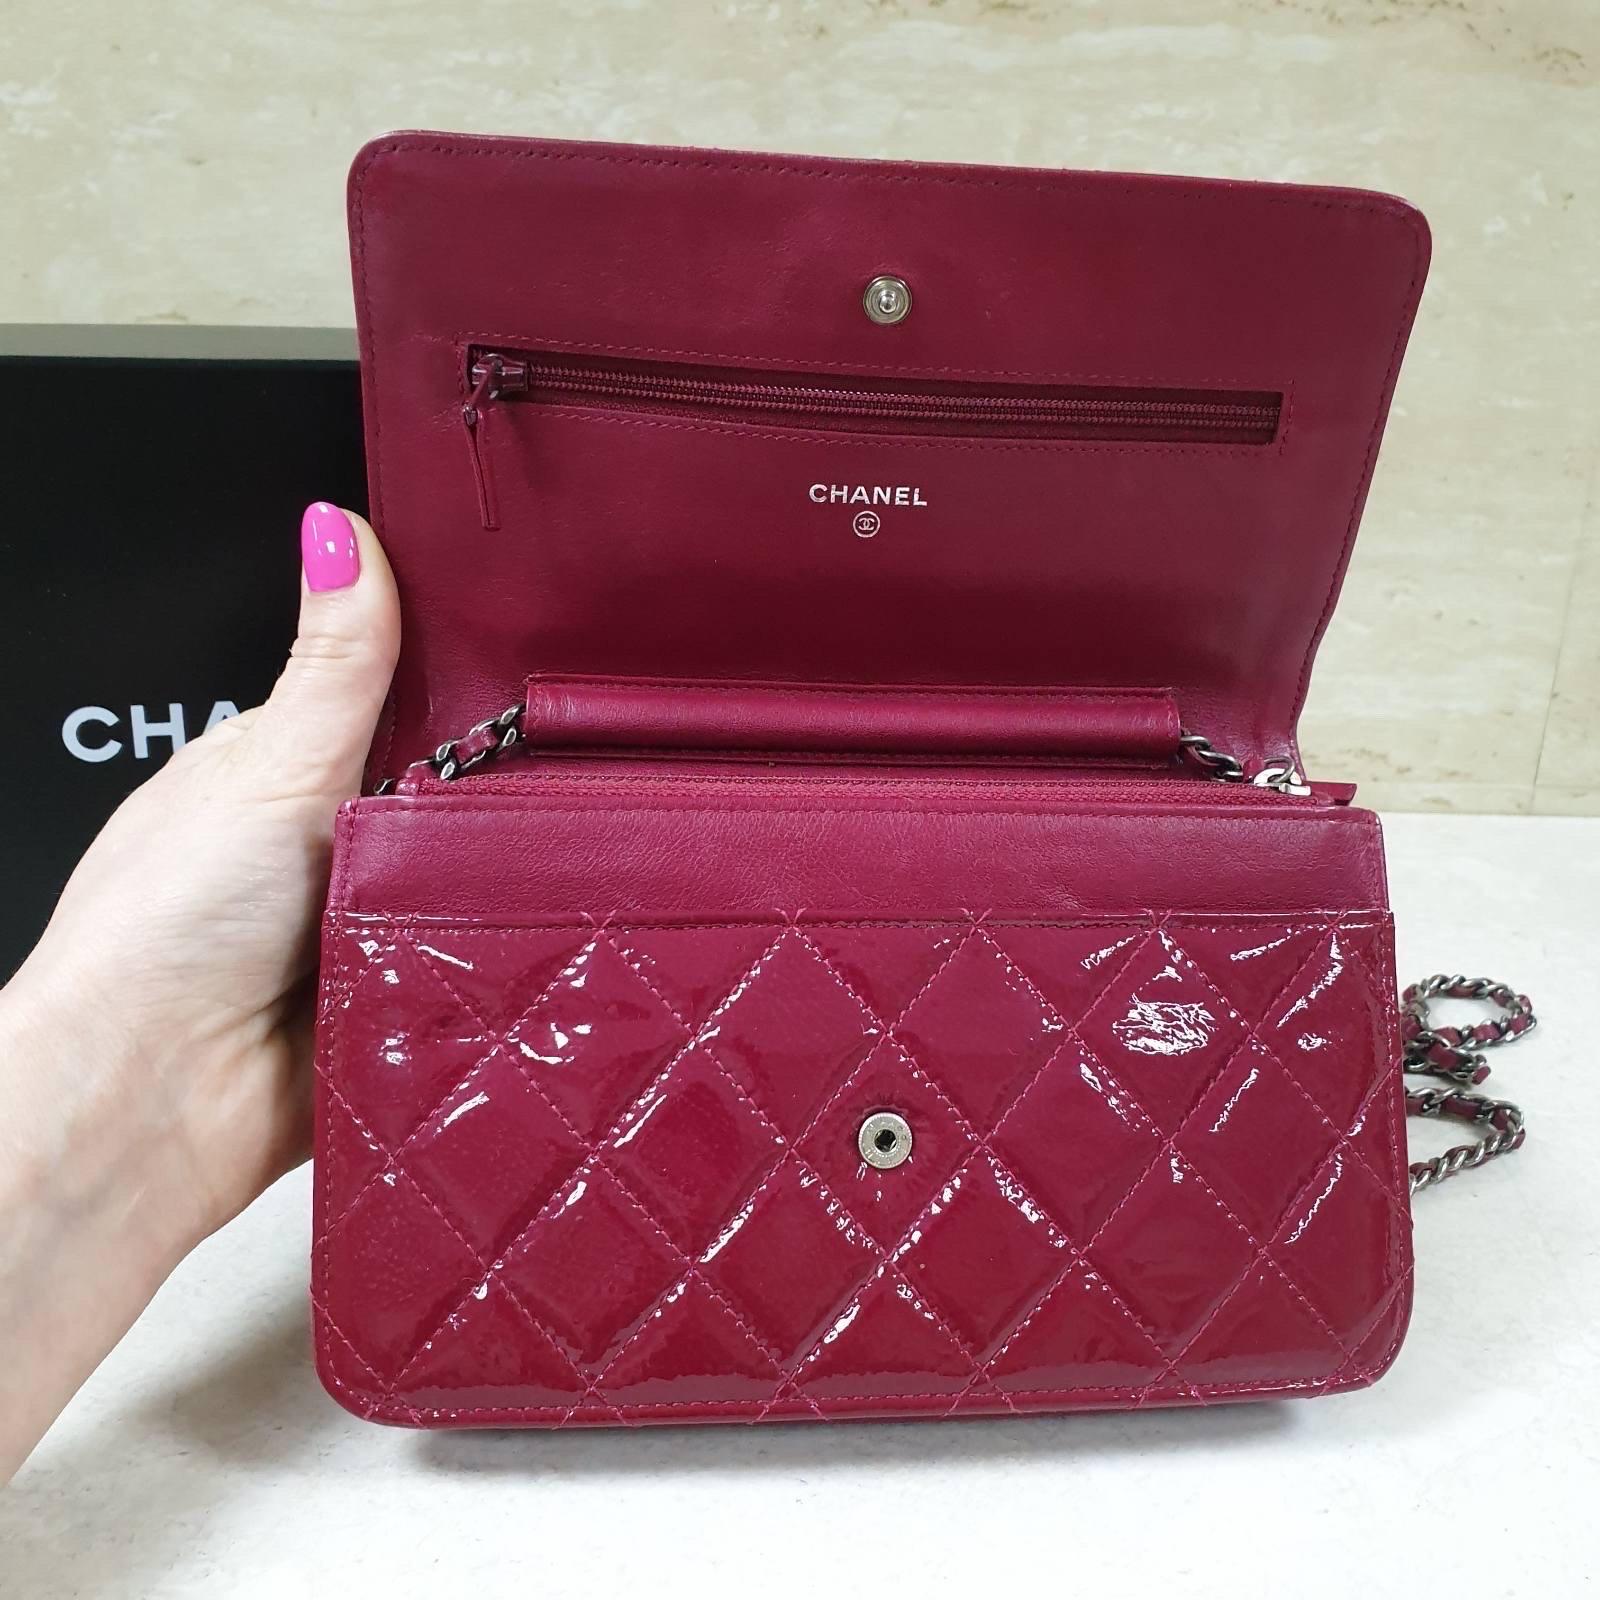 Chanel 2.55 Reissue WOC Red Rouge Patent Leather Bag 4